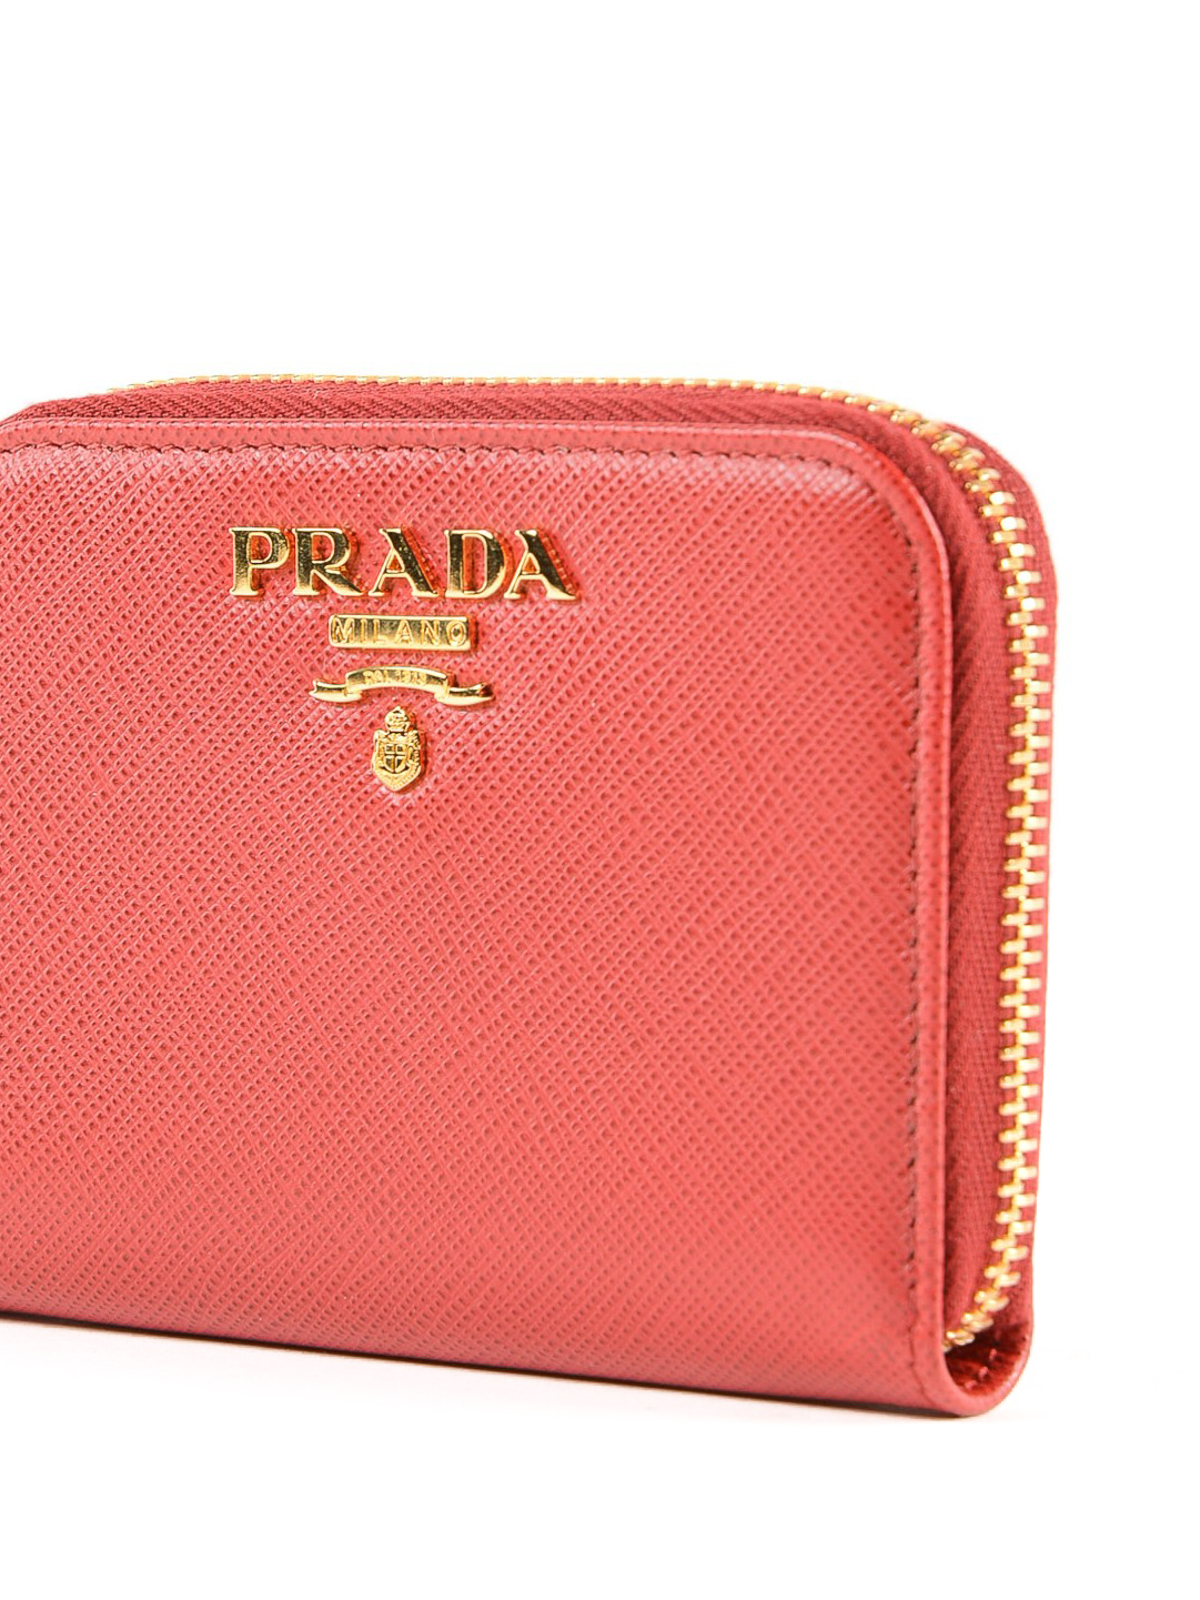 Wallets & purses Prada - Red Saffiano leather coin purse - 1MM268QWA68Z